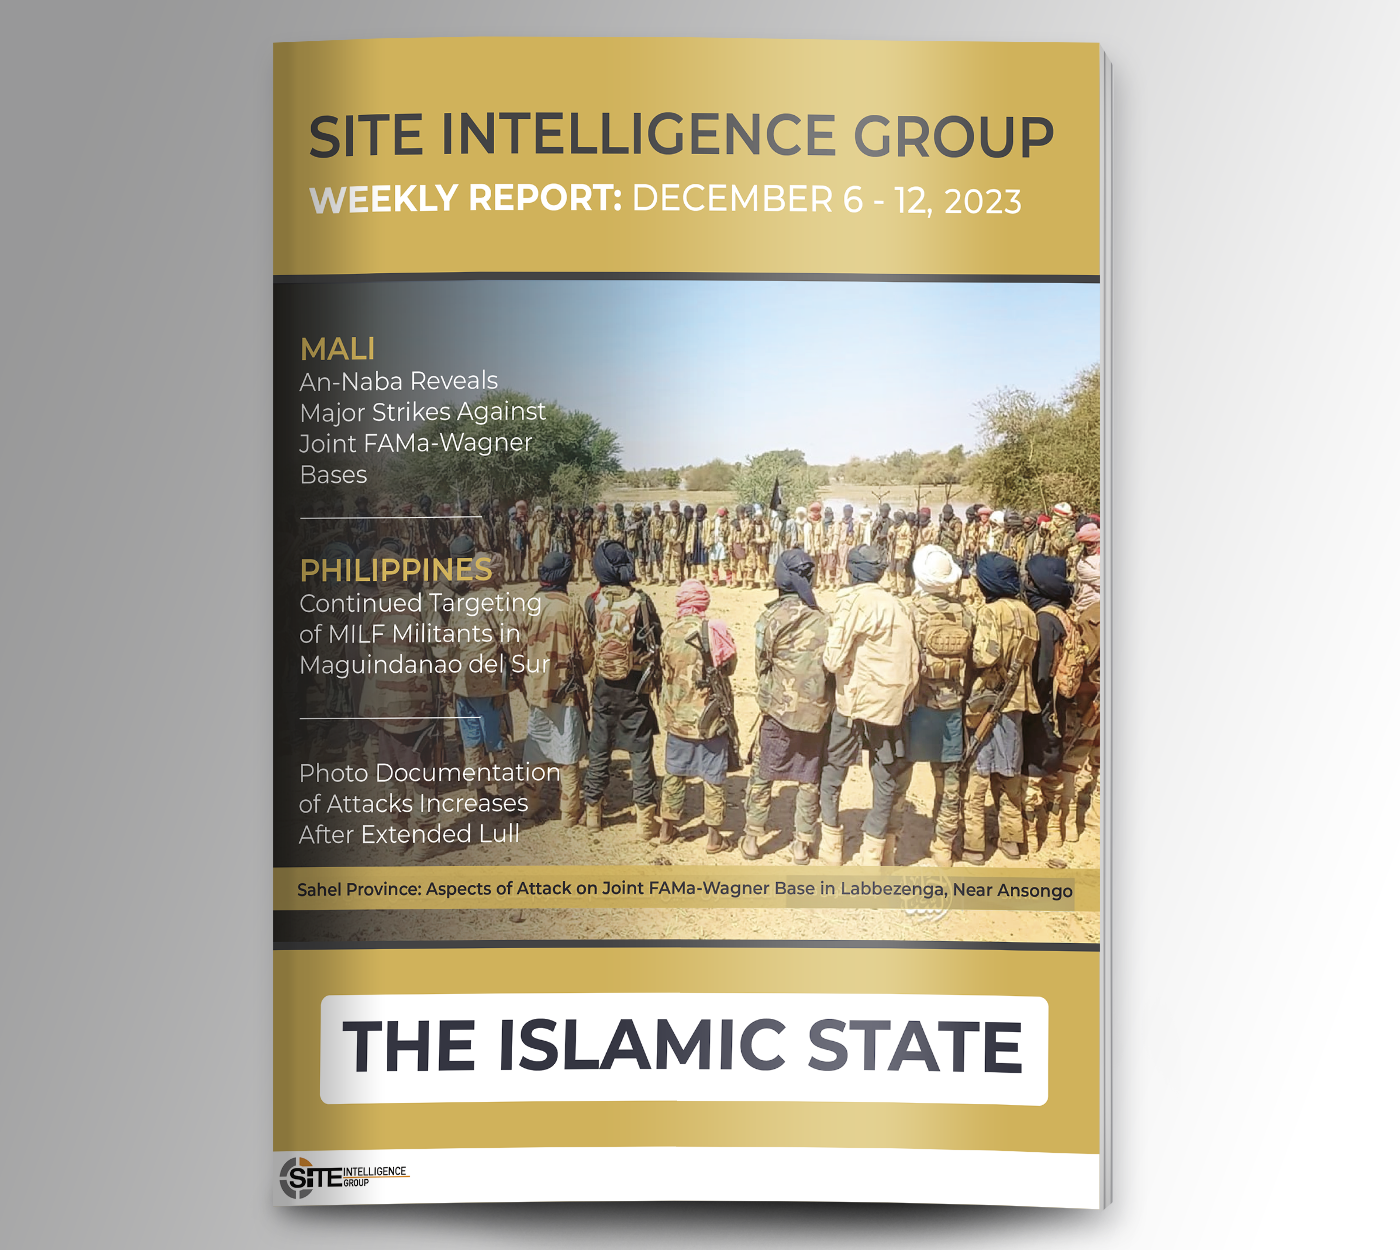 Weekly inSITE on the Islamic State for December 6-12, 2023